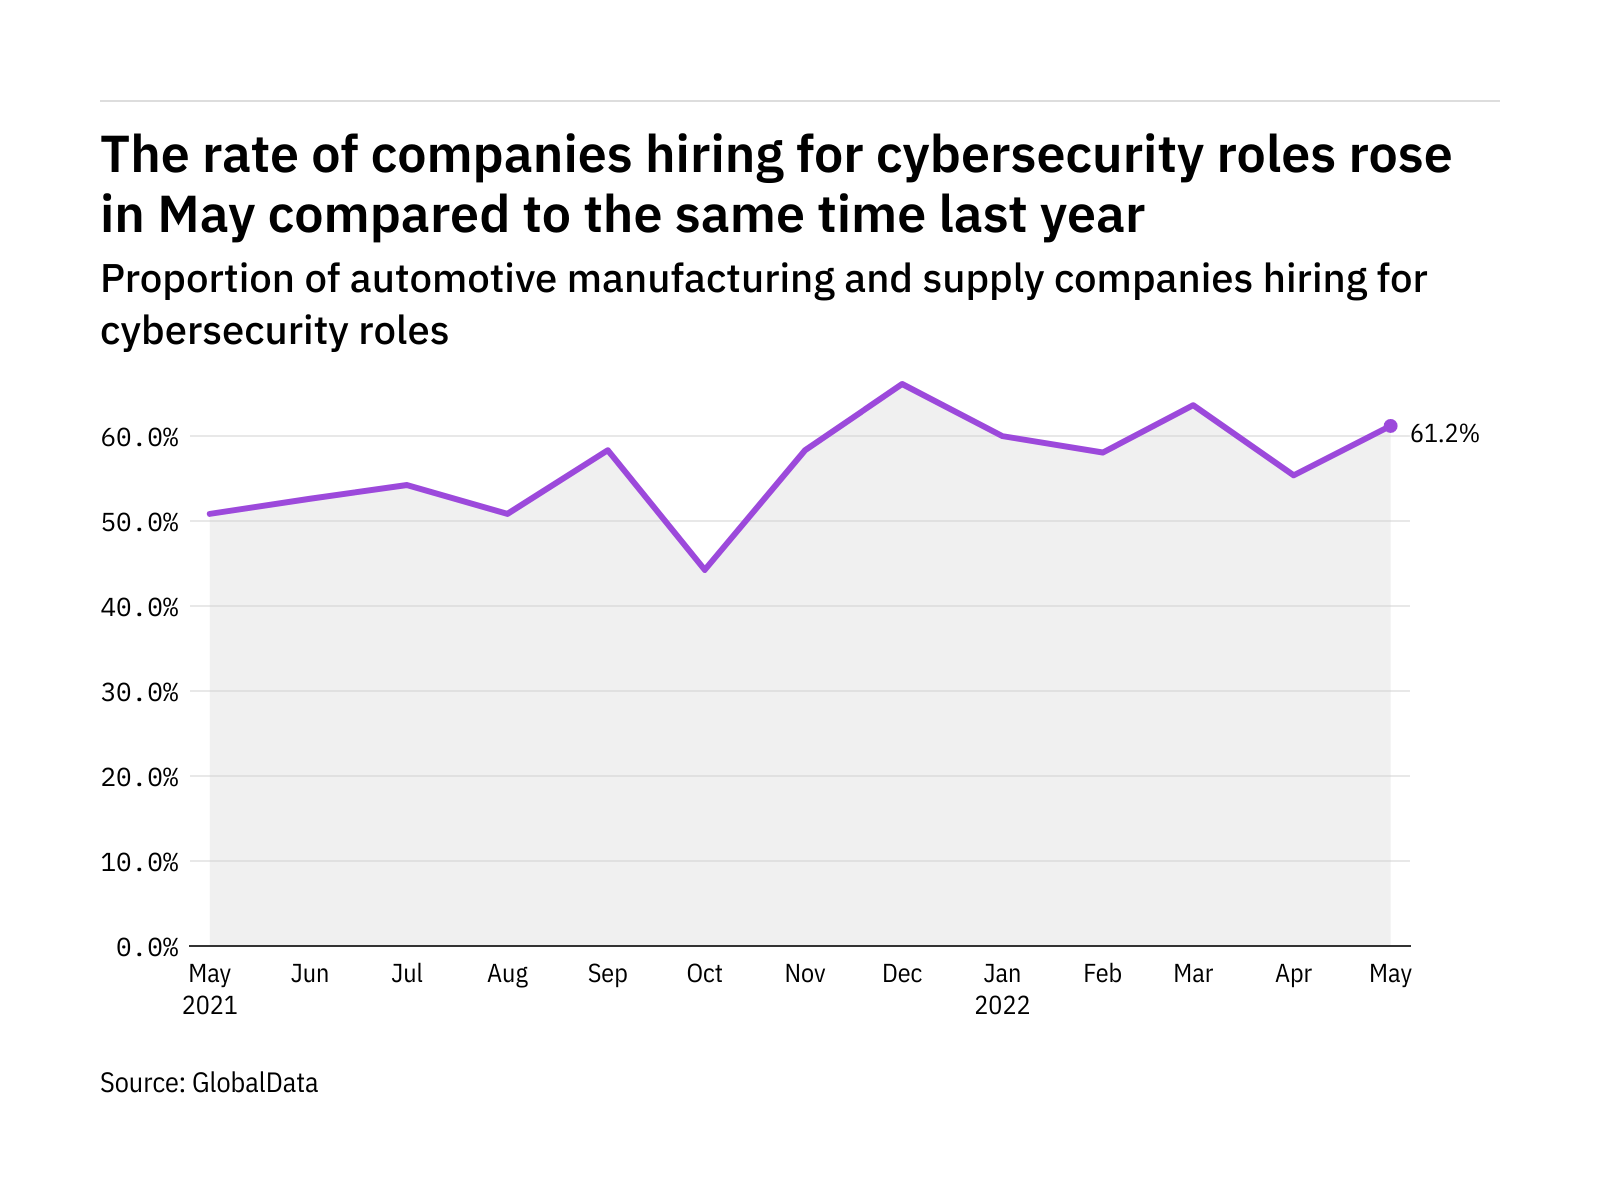 Cybersecurity hiring levels in the automotive industry rose in May 2022